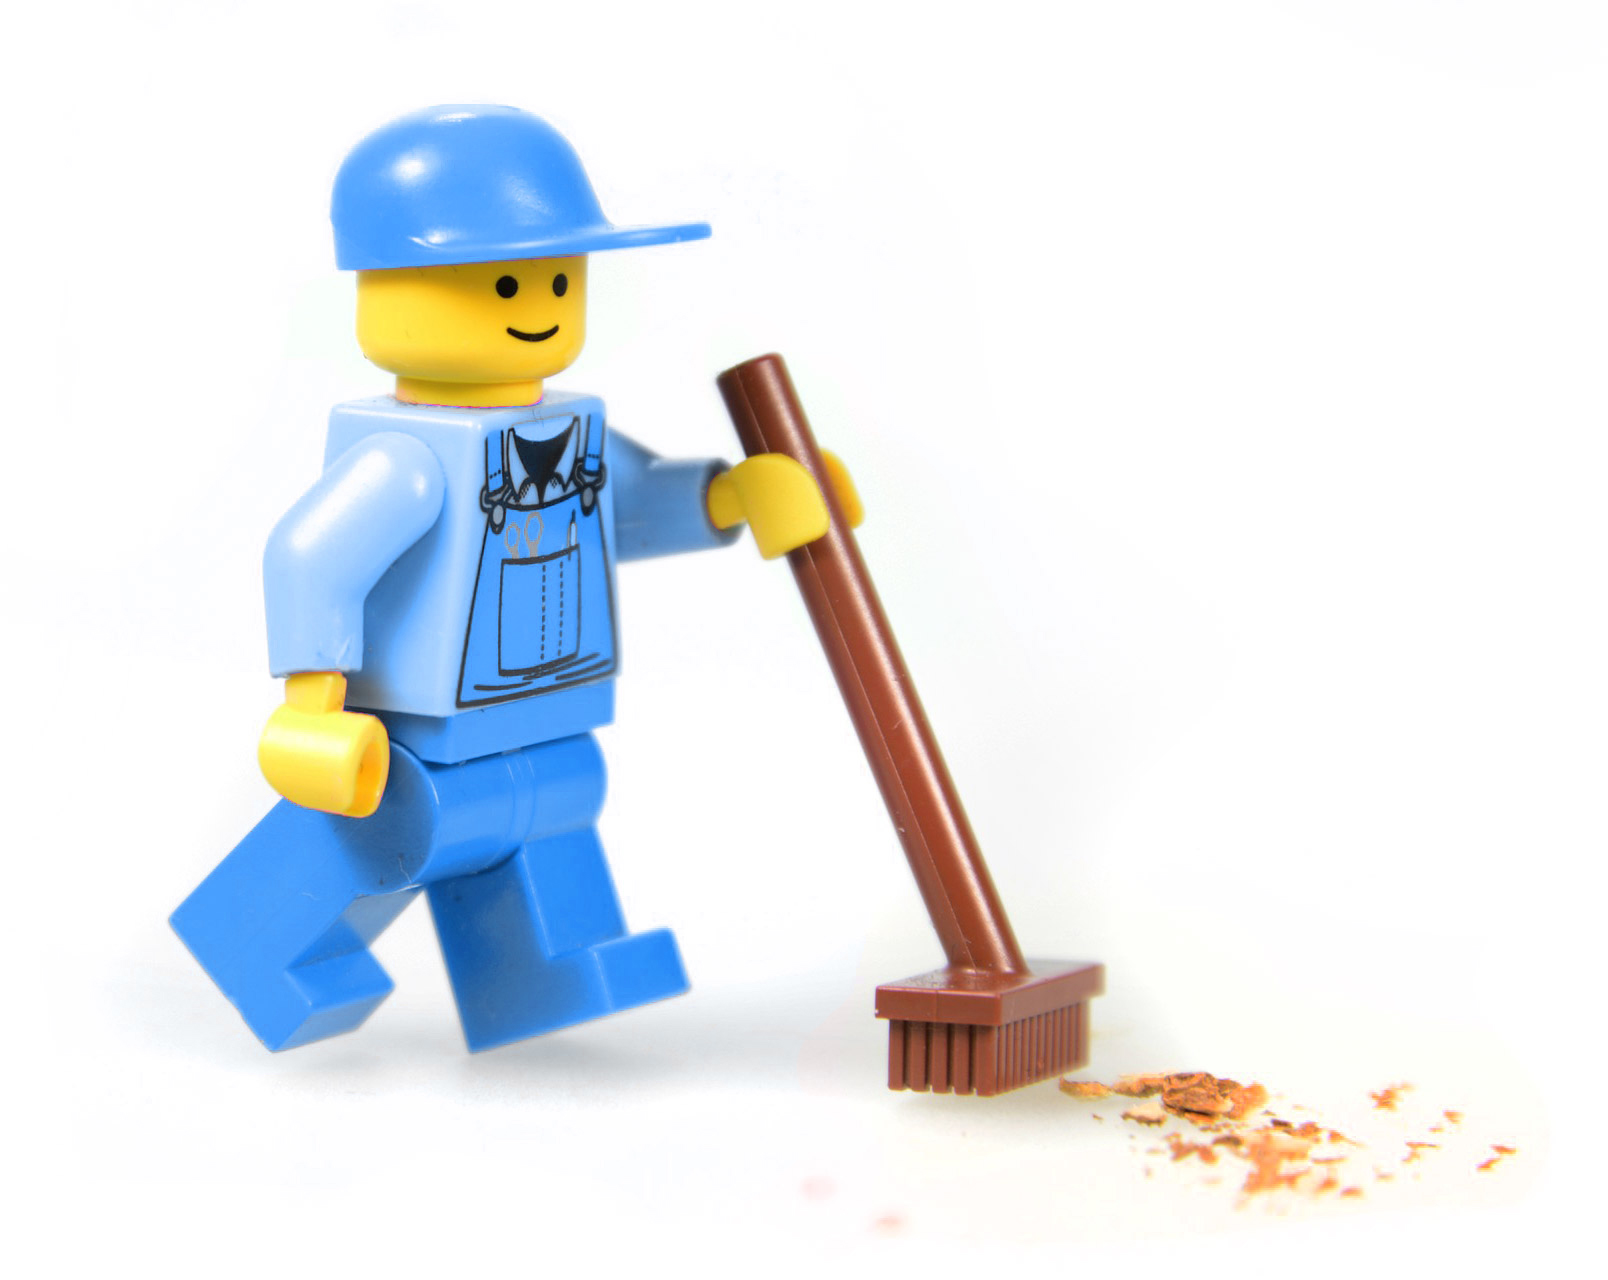 Lego man cleaning with a lego broom